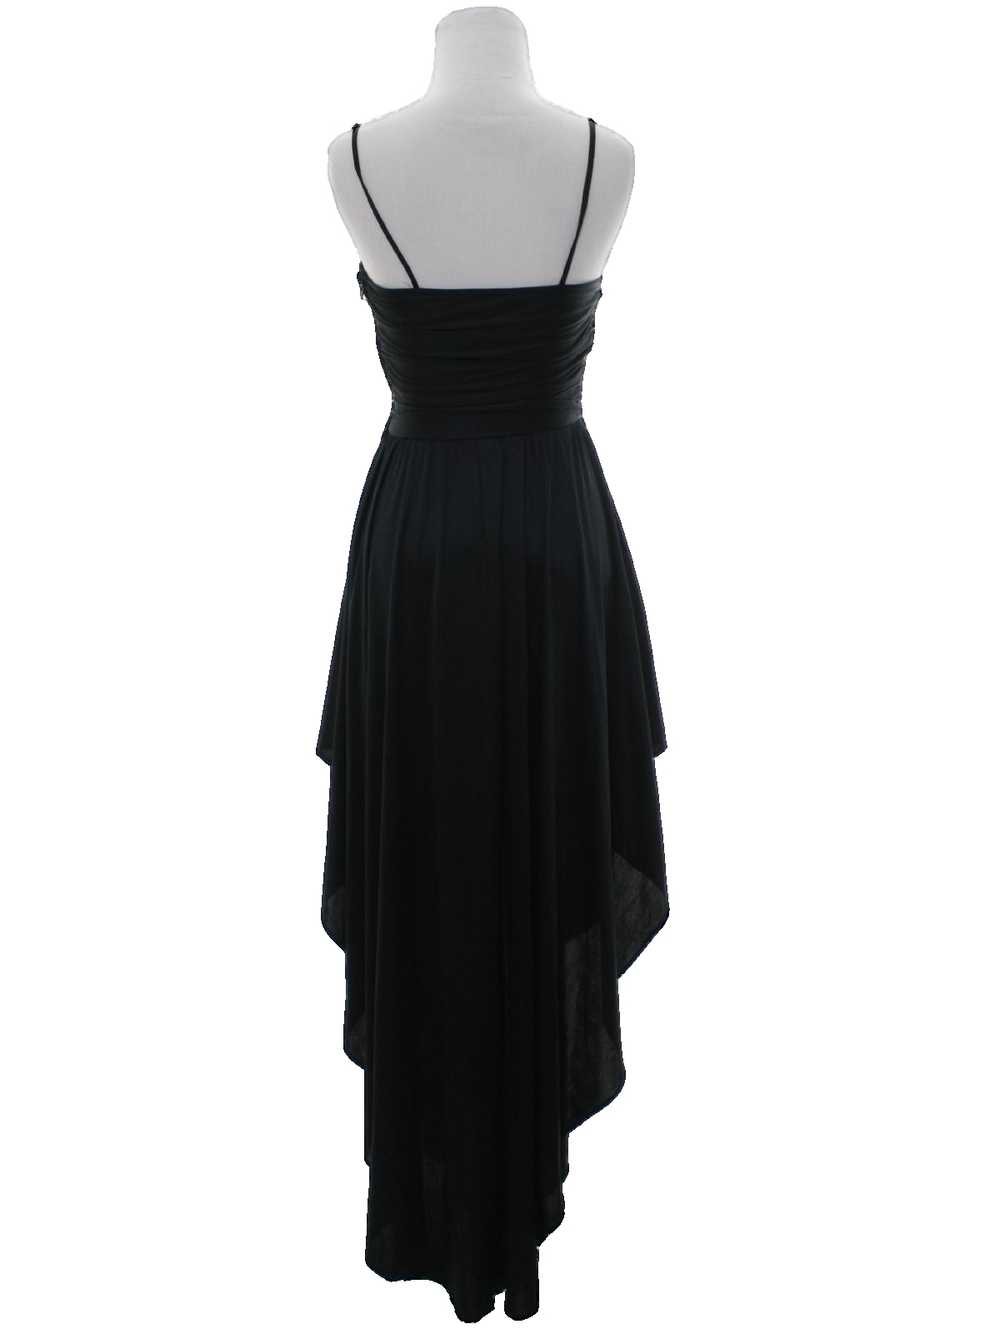 1980's Womens/Girls Prom Or Cocktail Maxi Dress - image 3